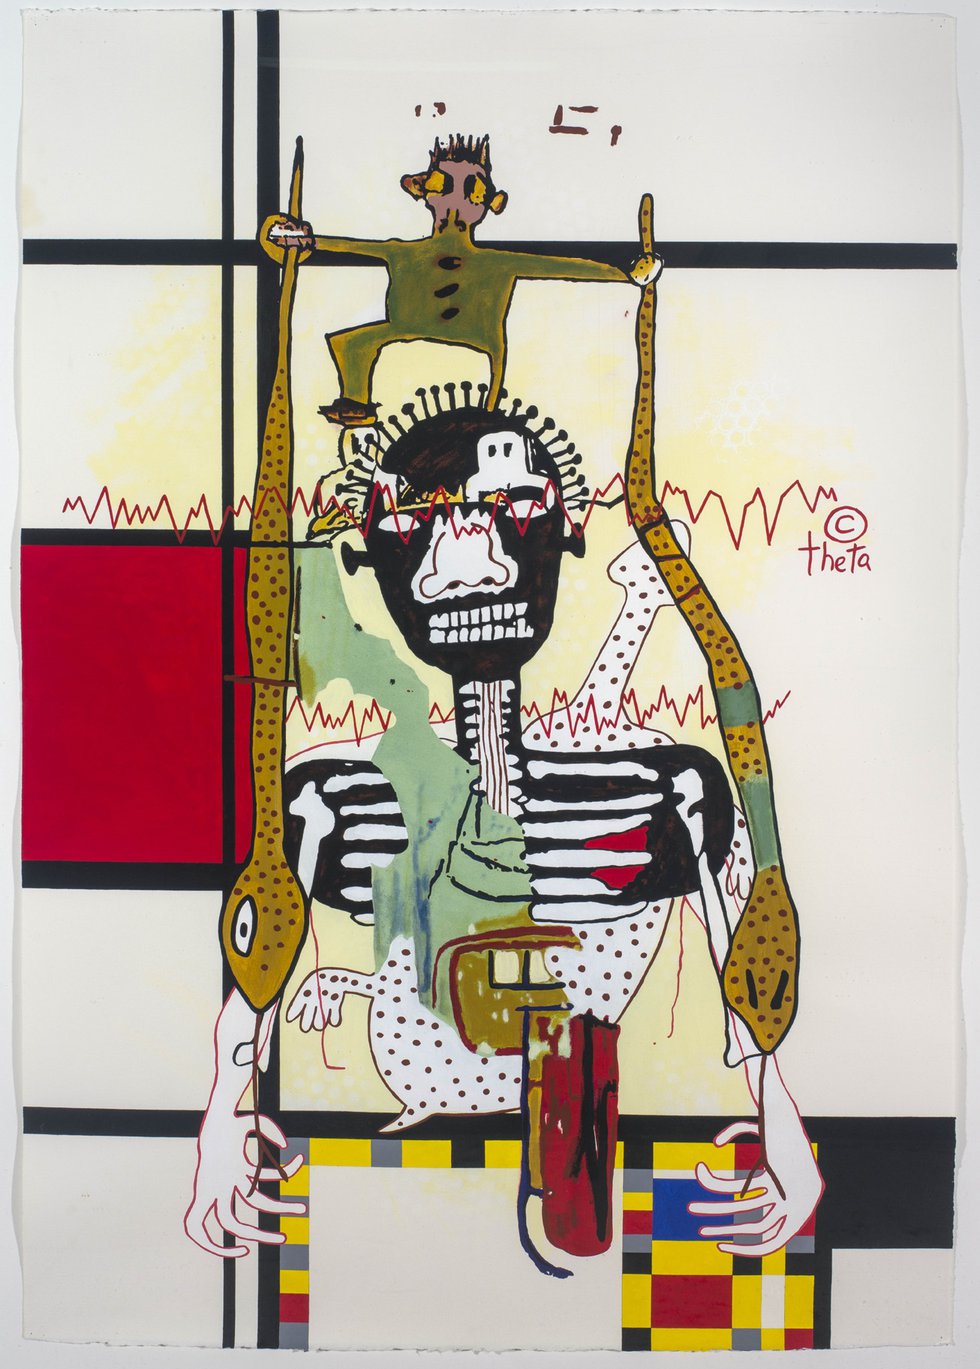 Gordon Bennett, "Notes to Basquiat: To Dance on a Tightrope," 1998